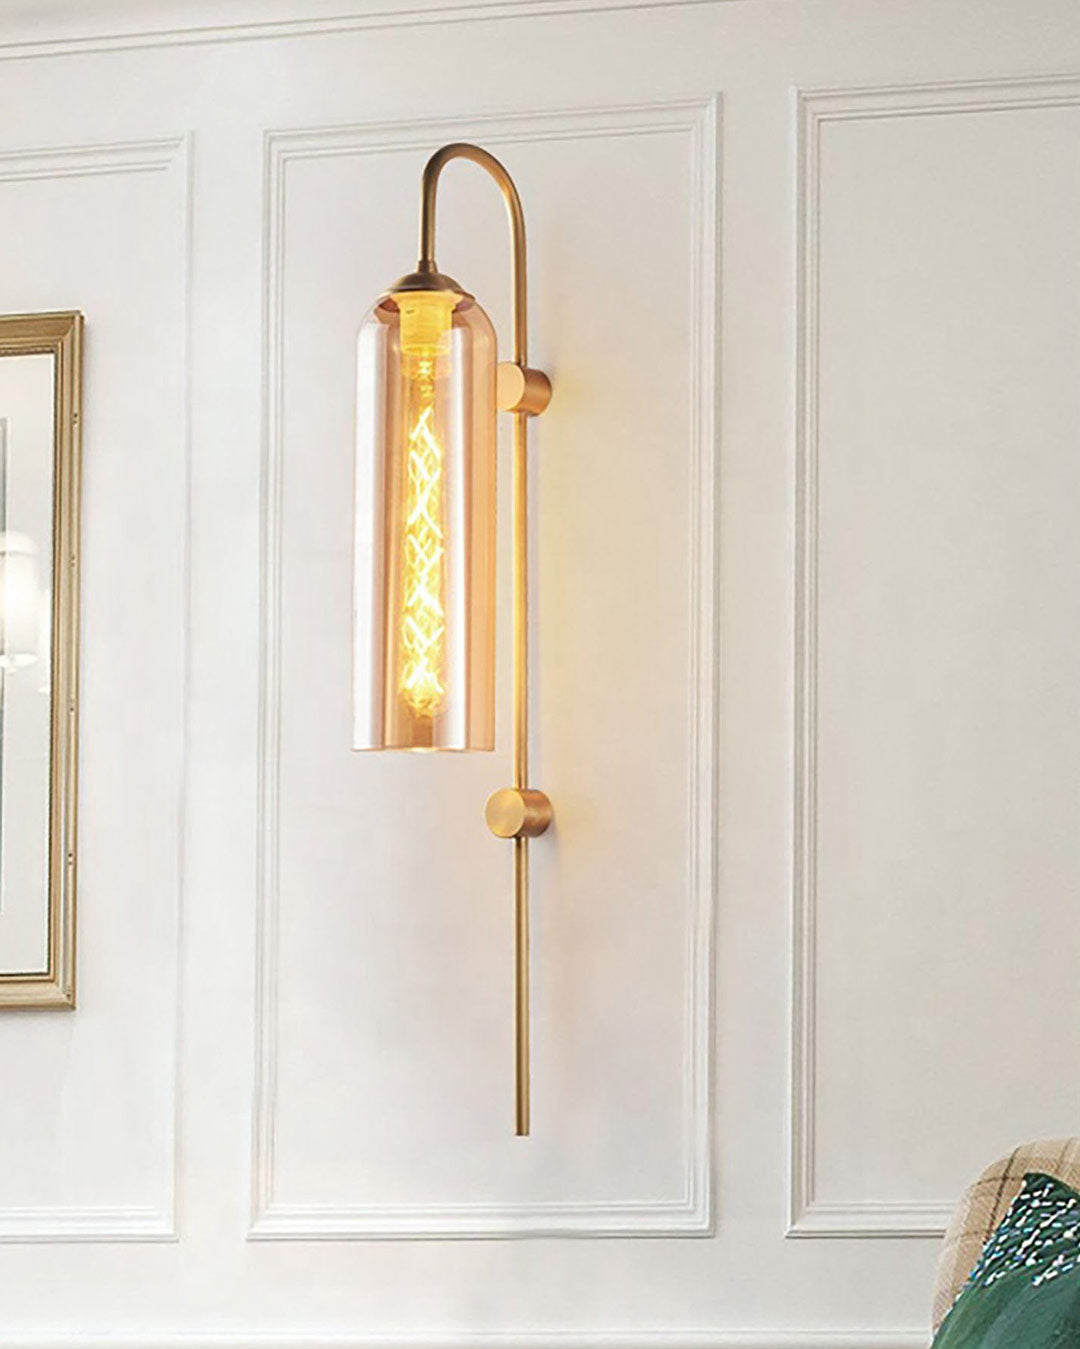 Ithaca Wall Sconce - Amber